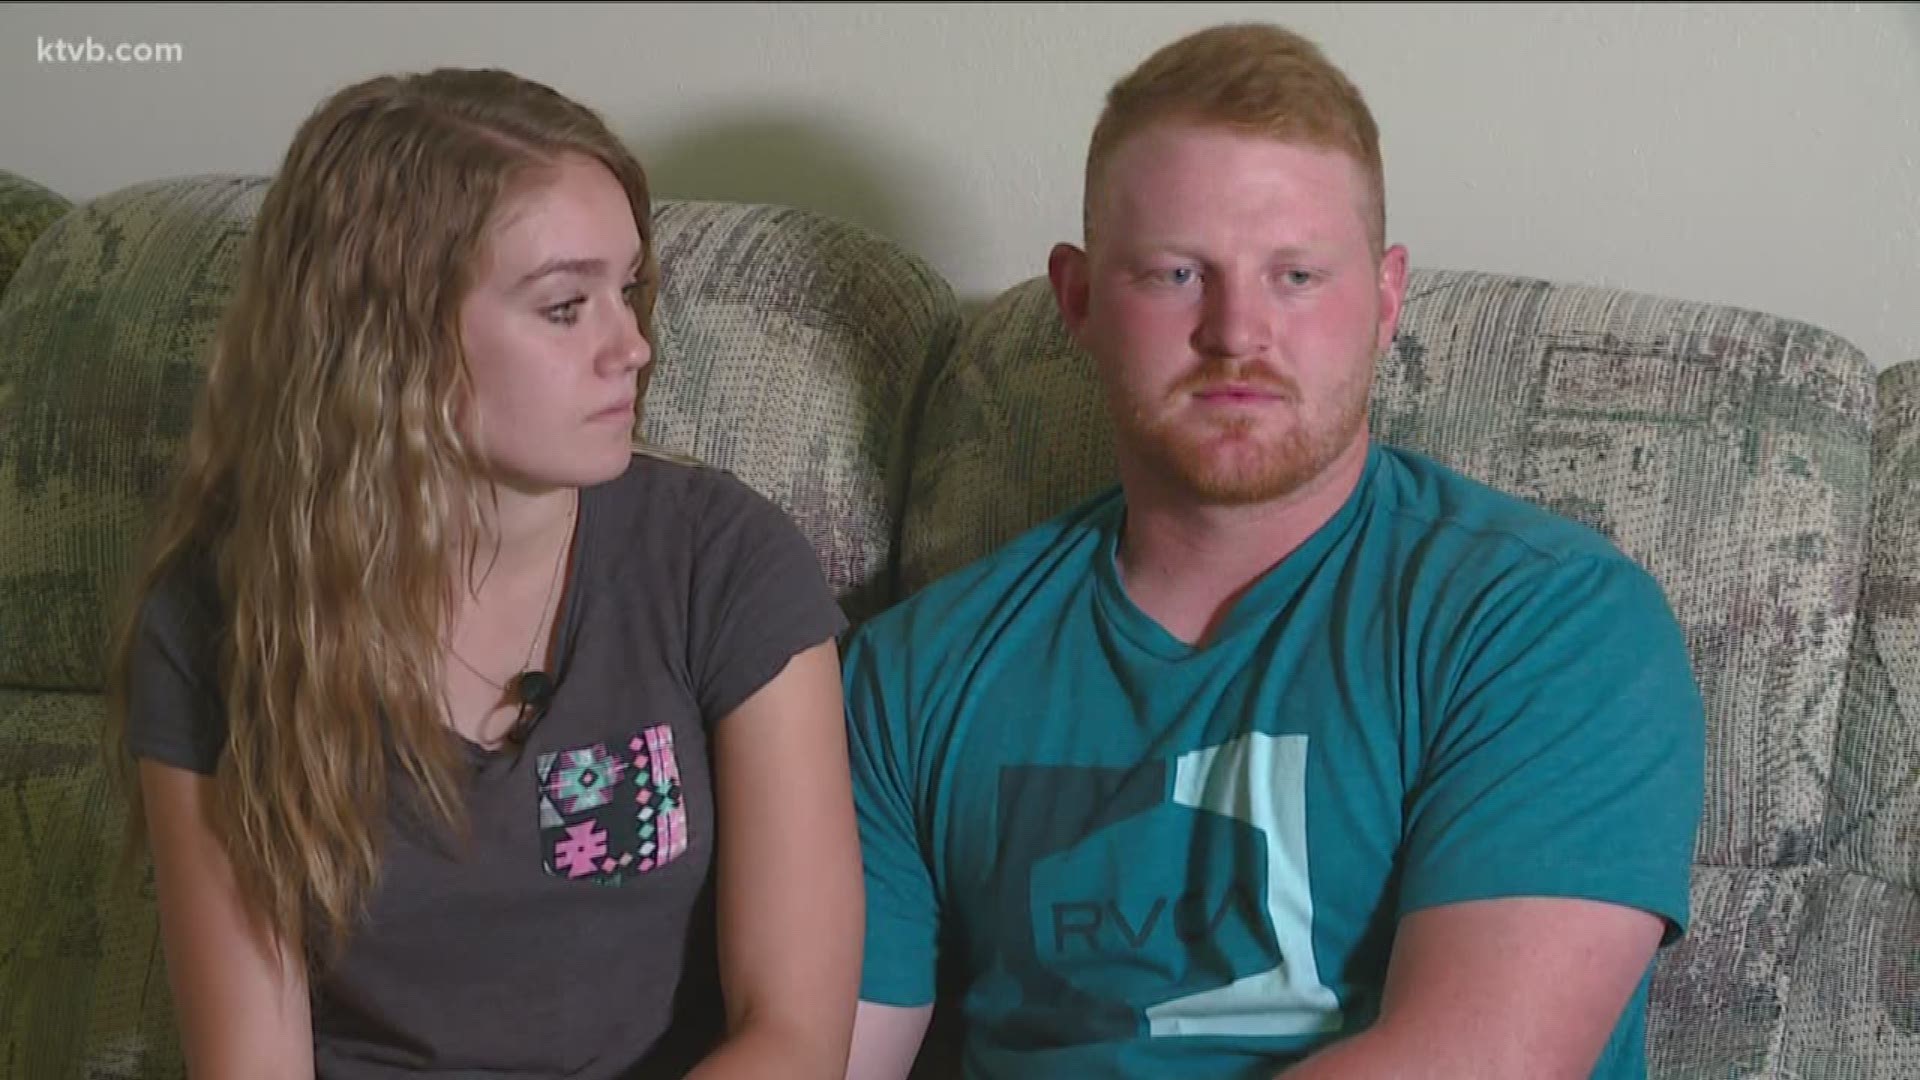 Only on KTVB: After losing multiple siblings in the same car accident in 2007, two family friends ended up falling in love and are now happily married.